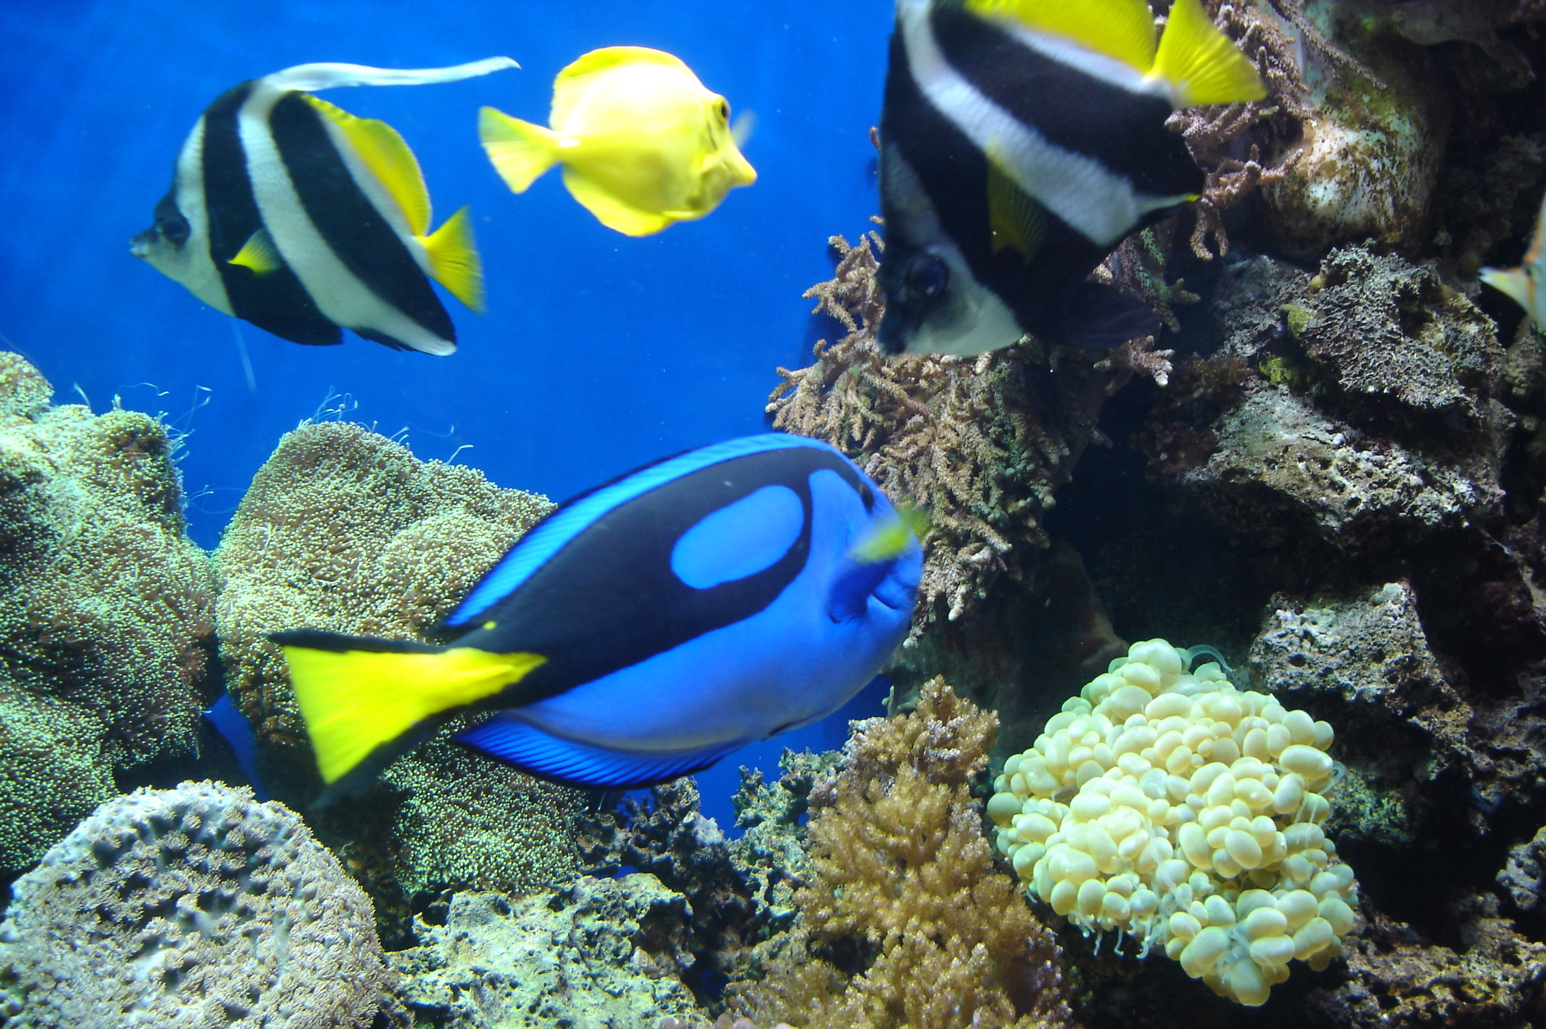 Blue Tang Pics4learning